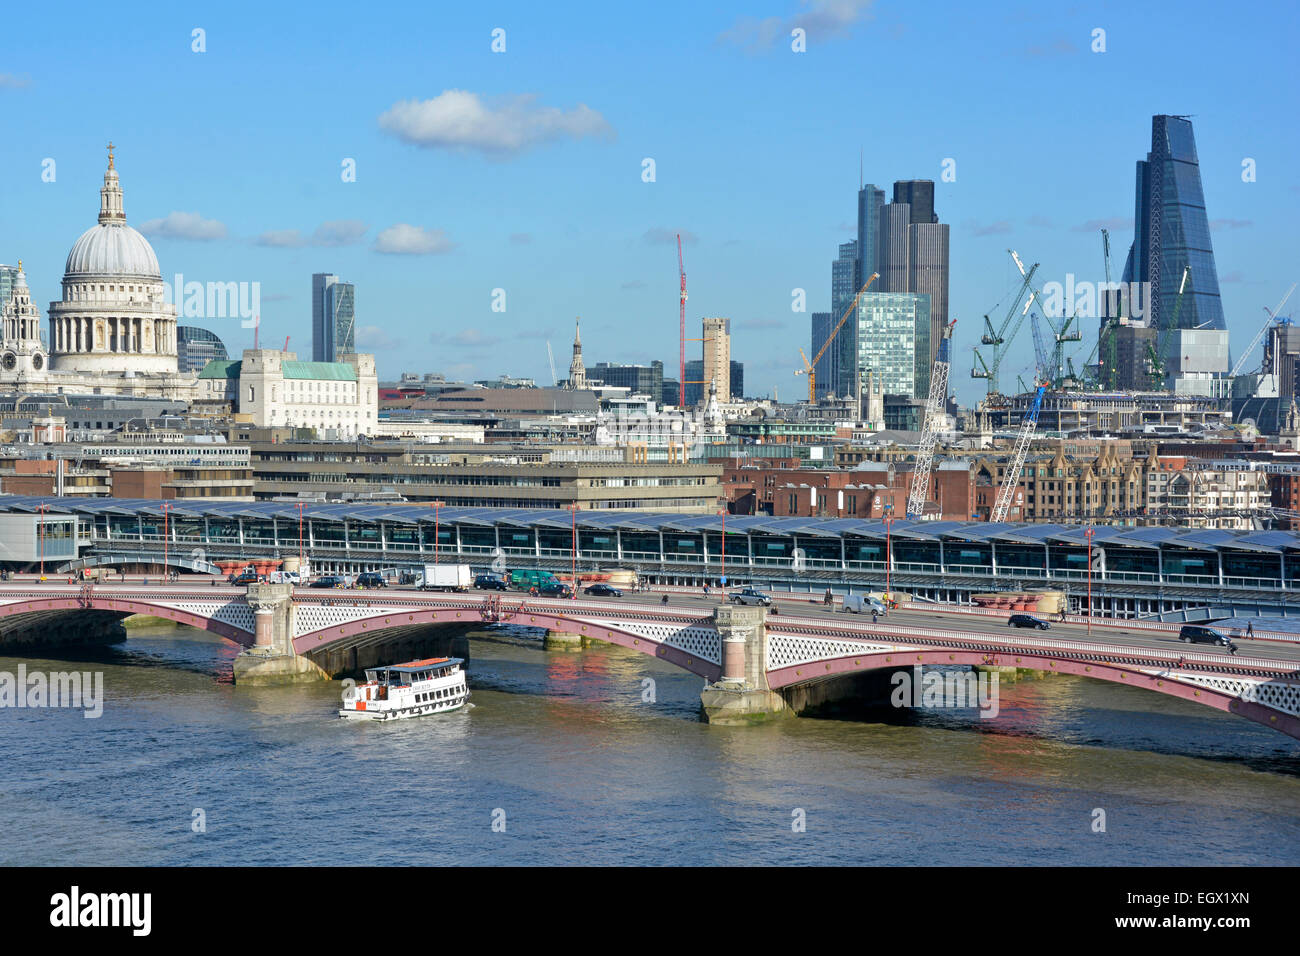 Blackfriars road Bridge & the solar panel roof of the new Blackfriars train station above the river Thames City of London beyond Stock Photo